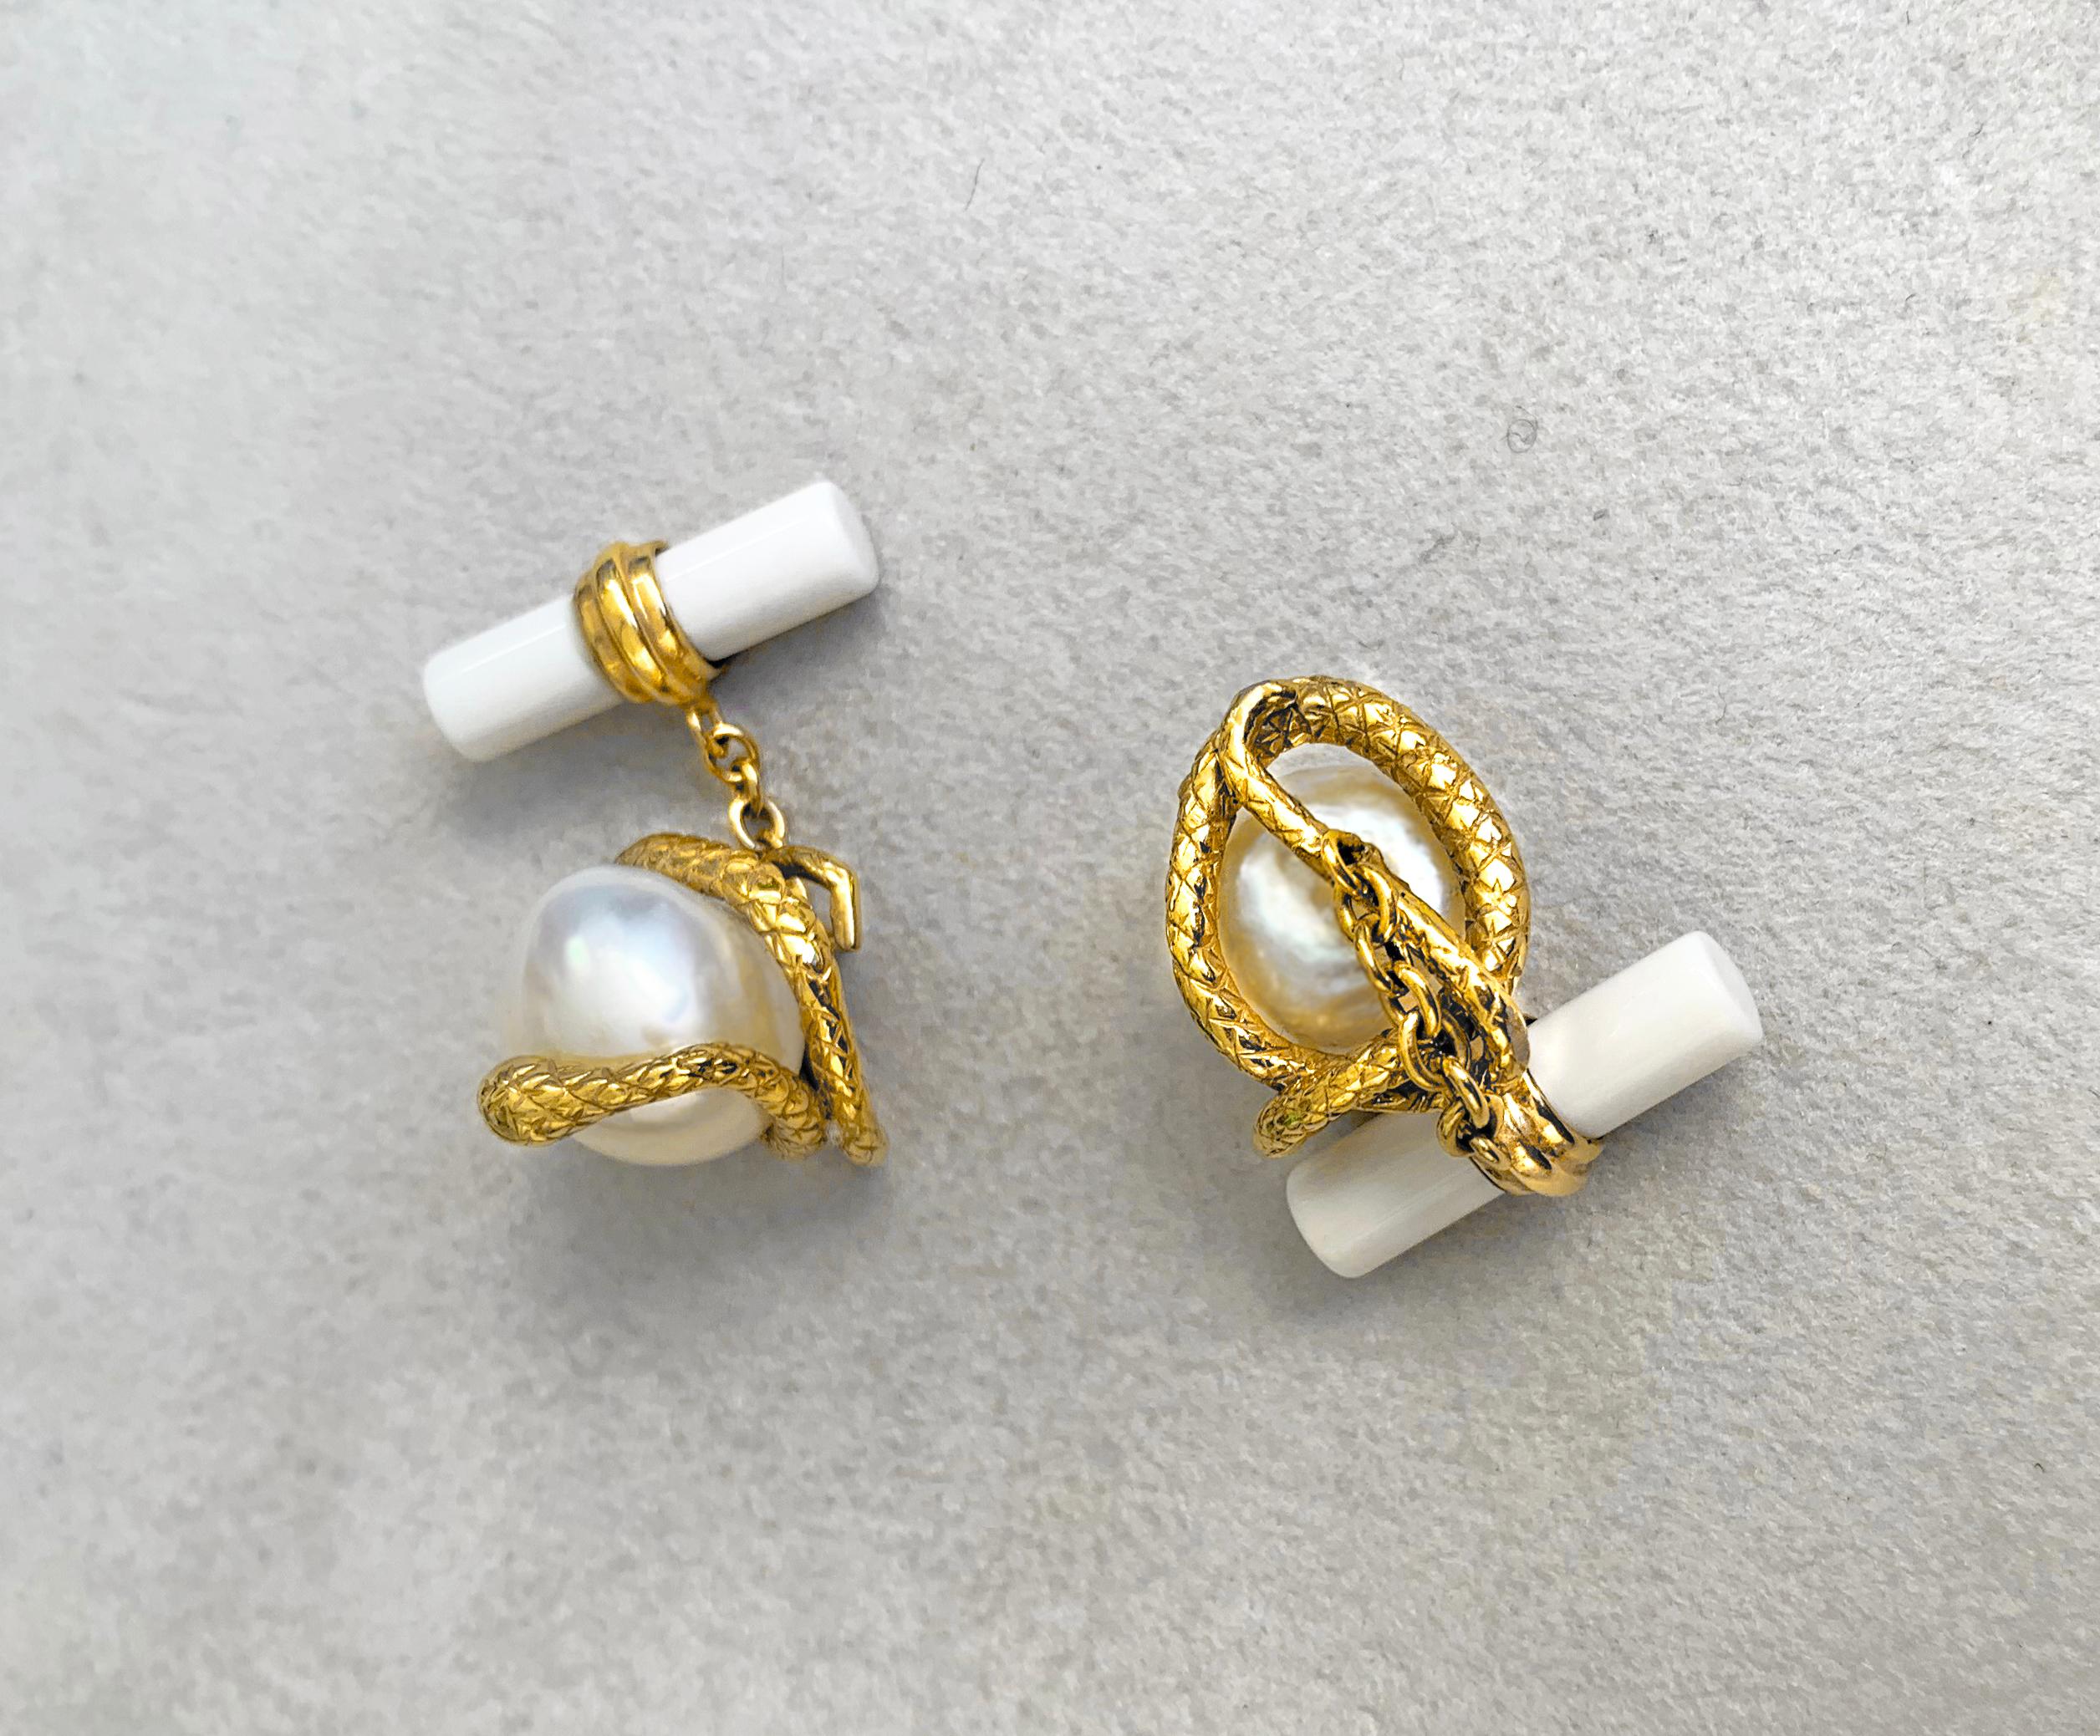 This magnificent pair of cufflinks features a baroque pearl gracing the front face, mounted on an 18k yellow gold piece shaped as a snake coiled all around the pearl. In gold is also the post that wraps around the cylindrical shape of the toggle,